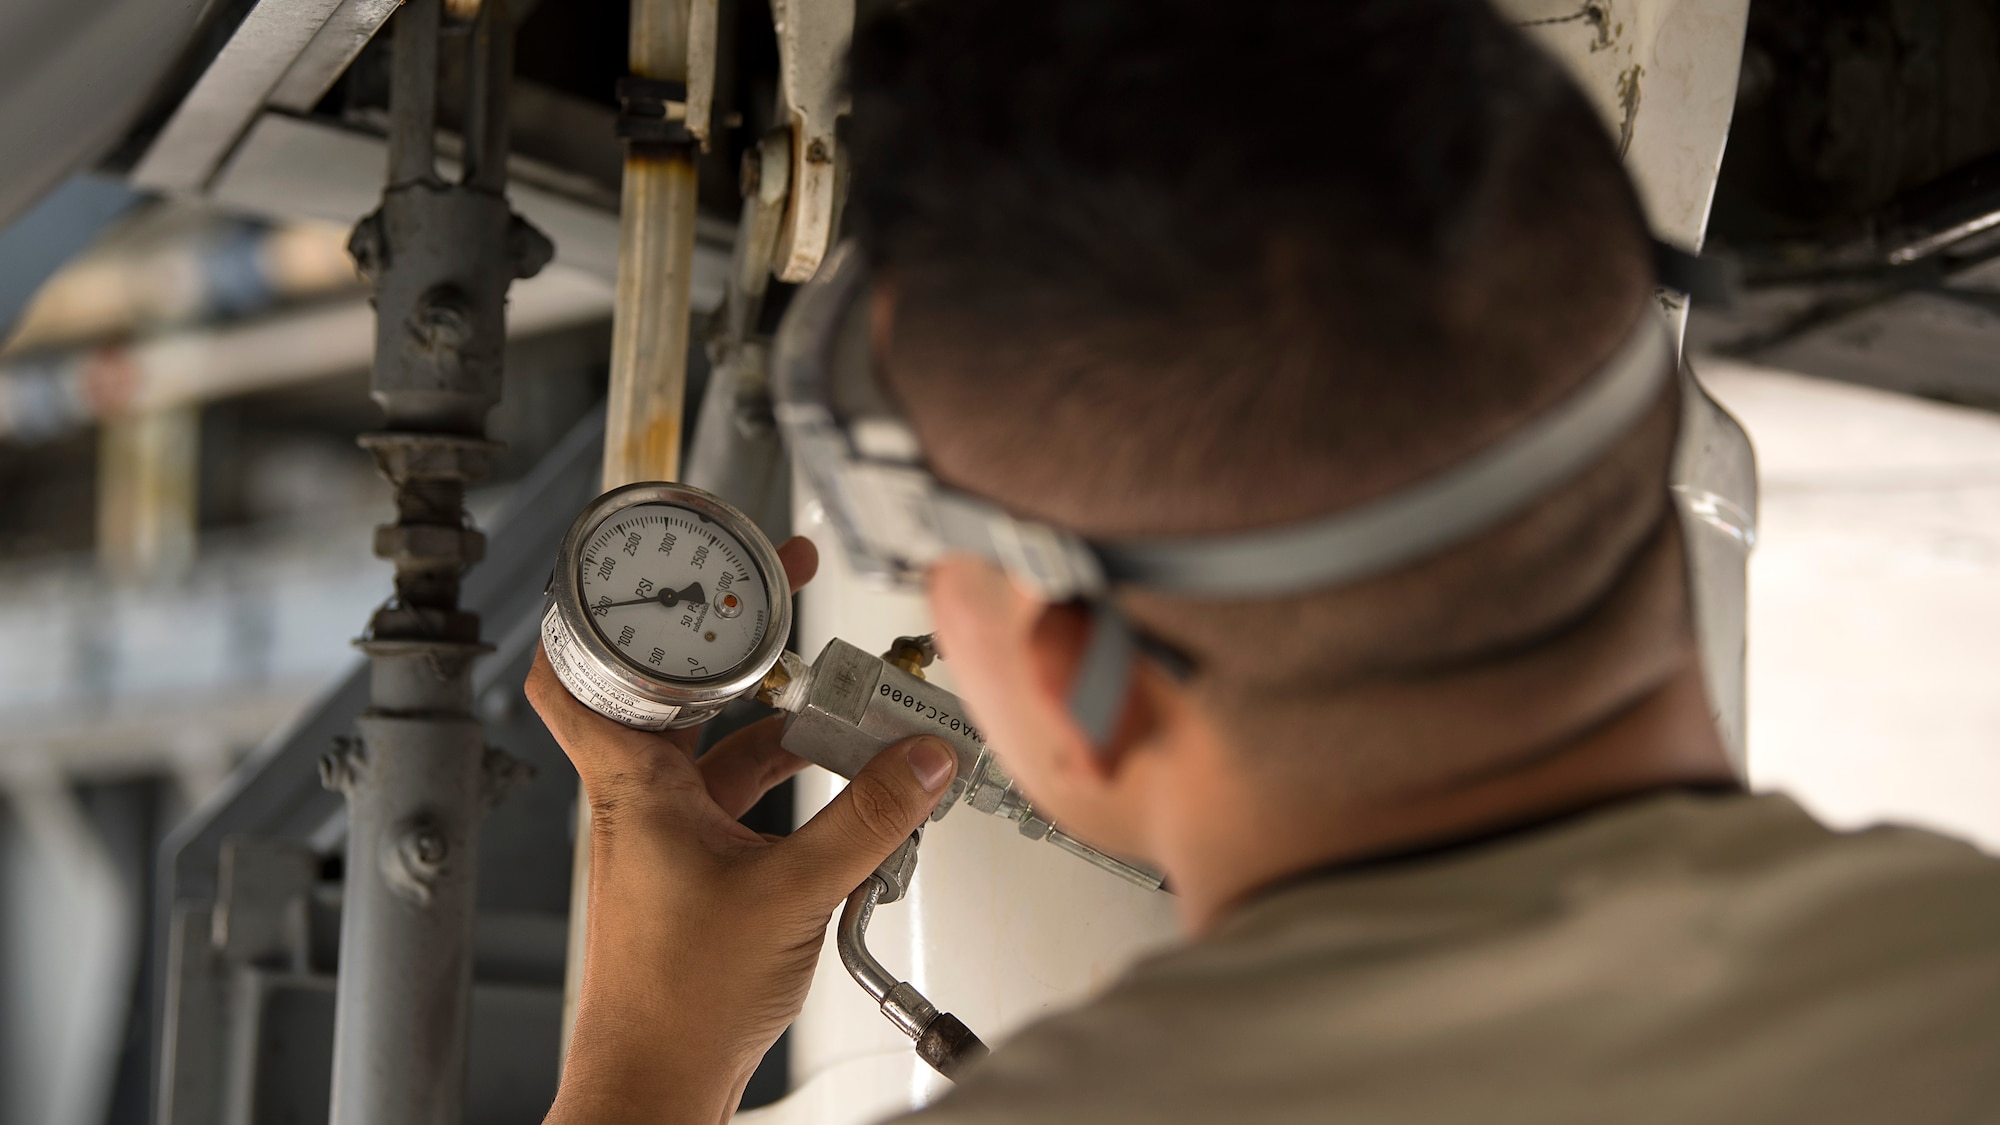 A maintenance Airman checks the pressure of a hydraulic system during a 900-hour inspection at MacDill Air Force Base, Fla., May 16, 2018. This inspection occurs after an aircraft has flown 900 hours. MacDill’s contribution to global mobility is possible because of the maintenance Airmen who dedicate countless hours to ensure aircraft are fit for flight.